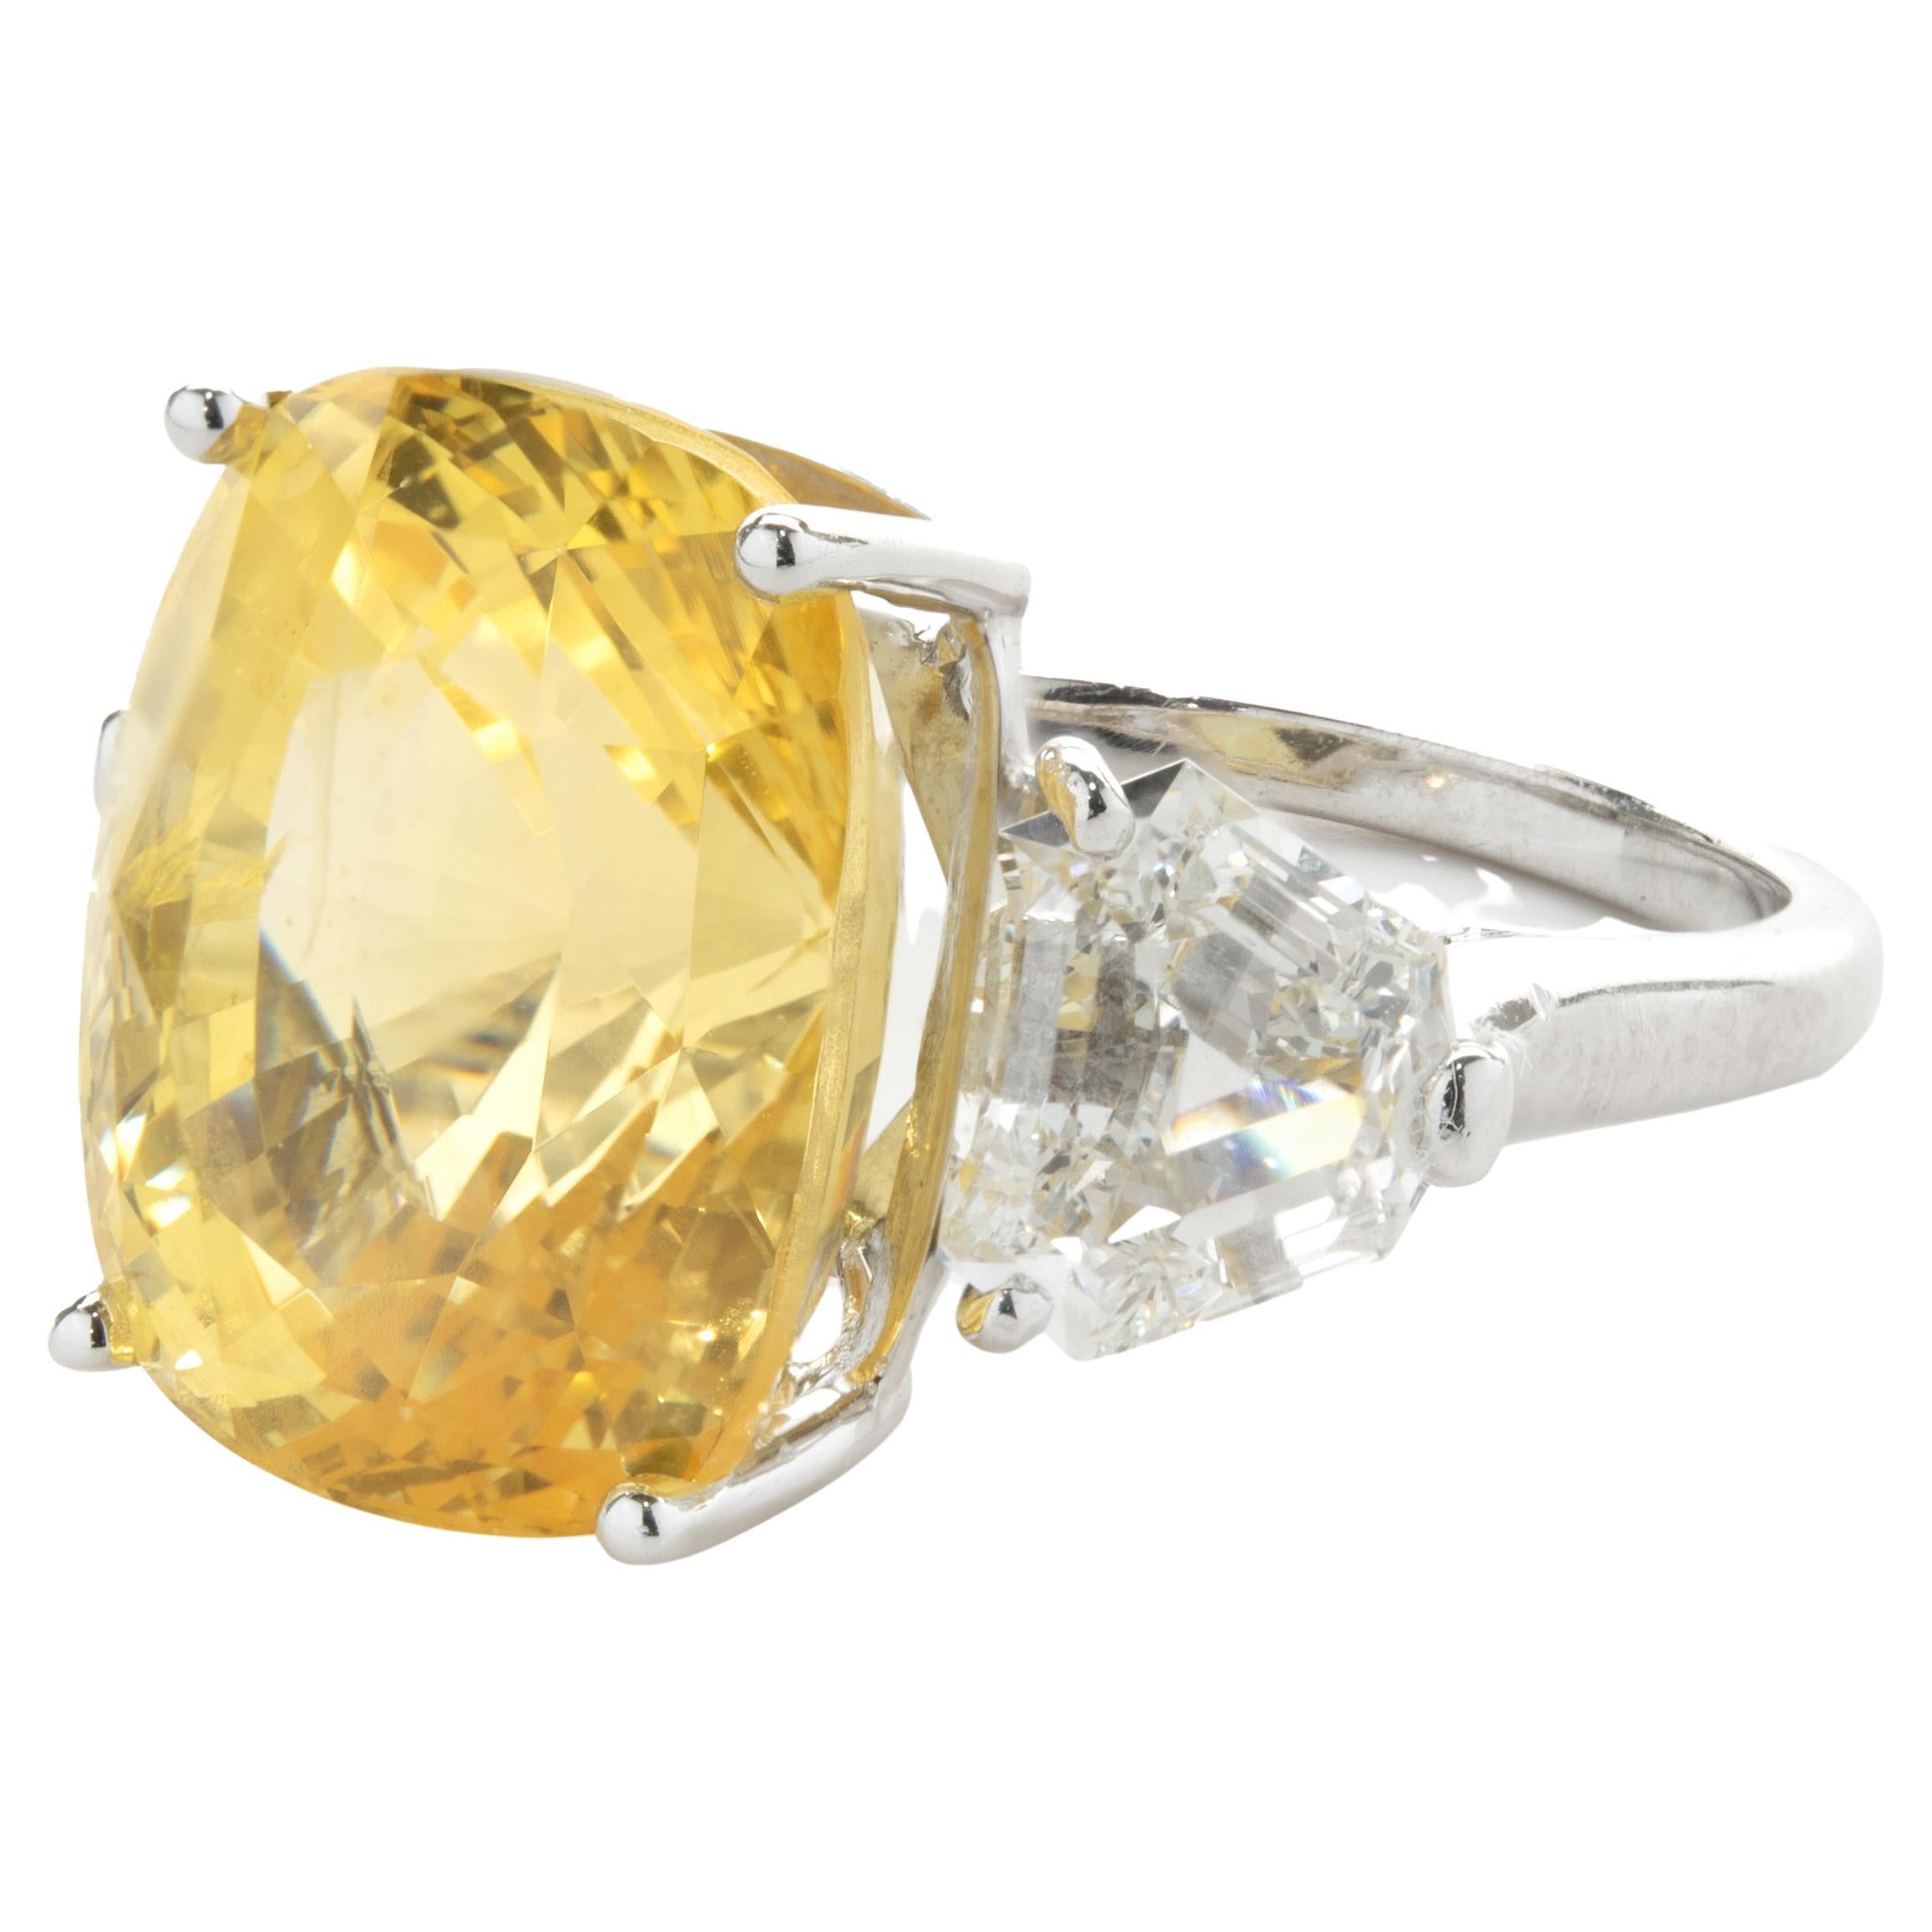 Designer: custom
Material: Platinum
Diamond: 2 trapezoid cut = 1.70cttw
Color: F
Clarity: VS1-2
Yellow Sapphire: 1 oval cut = 13.14ct
Dimensions: ring top measures 14.63mm wide
Ring Size: 6.5 (complimentary sizing available)
Weight: 9.13 grams
